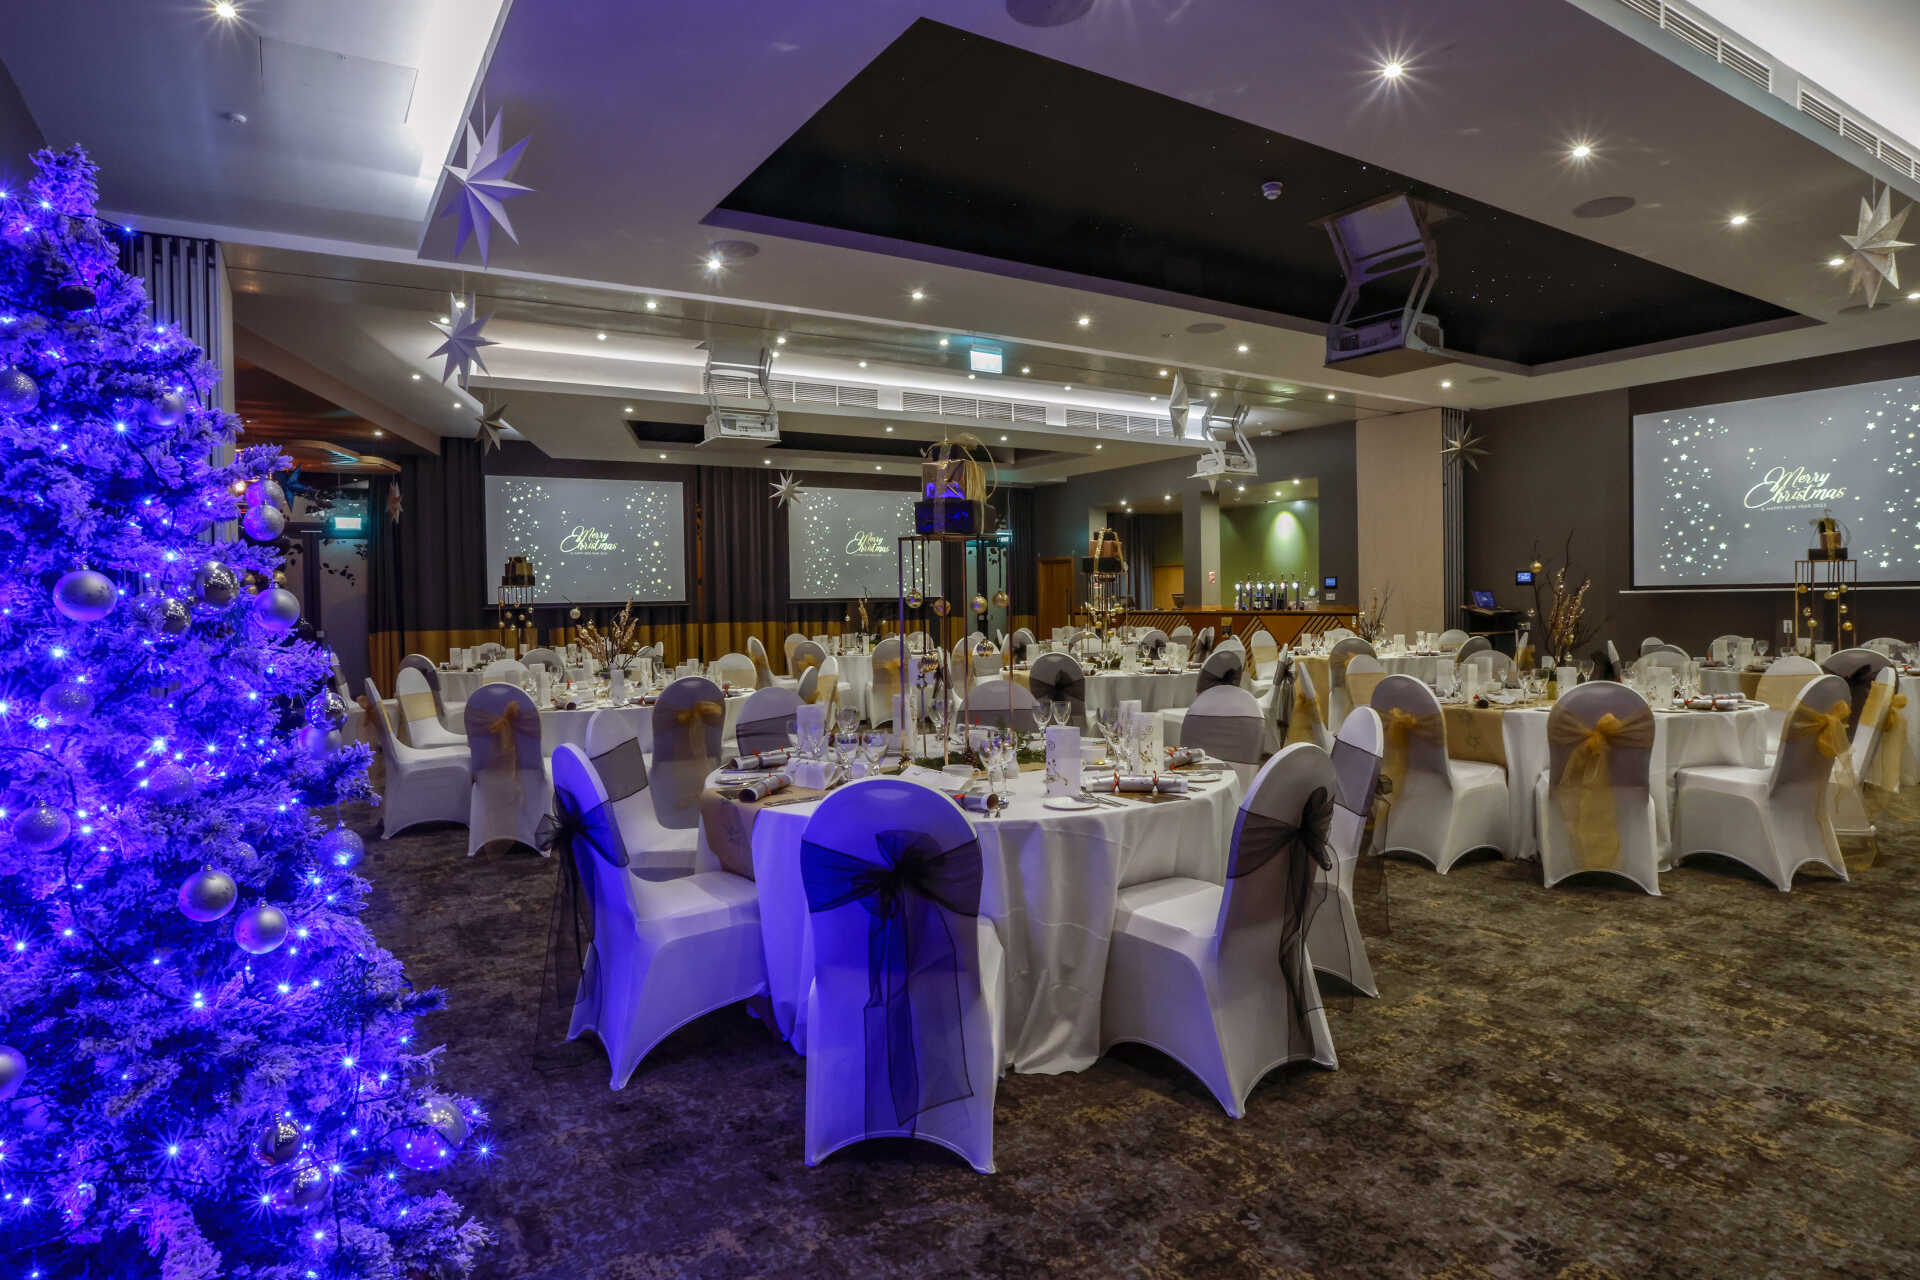 Darwin Conference Suite set up banquet style for a Christmas party.